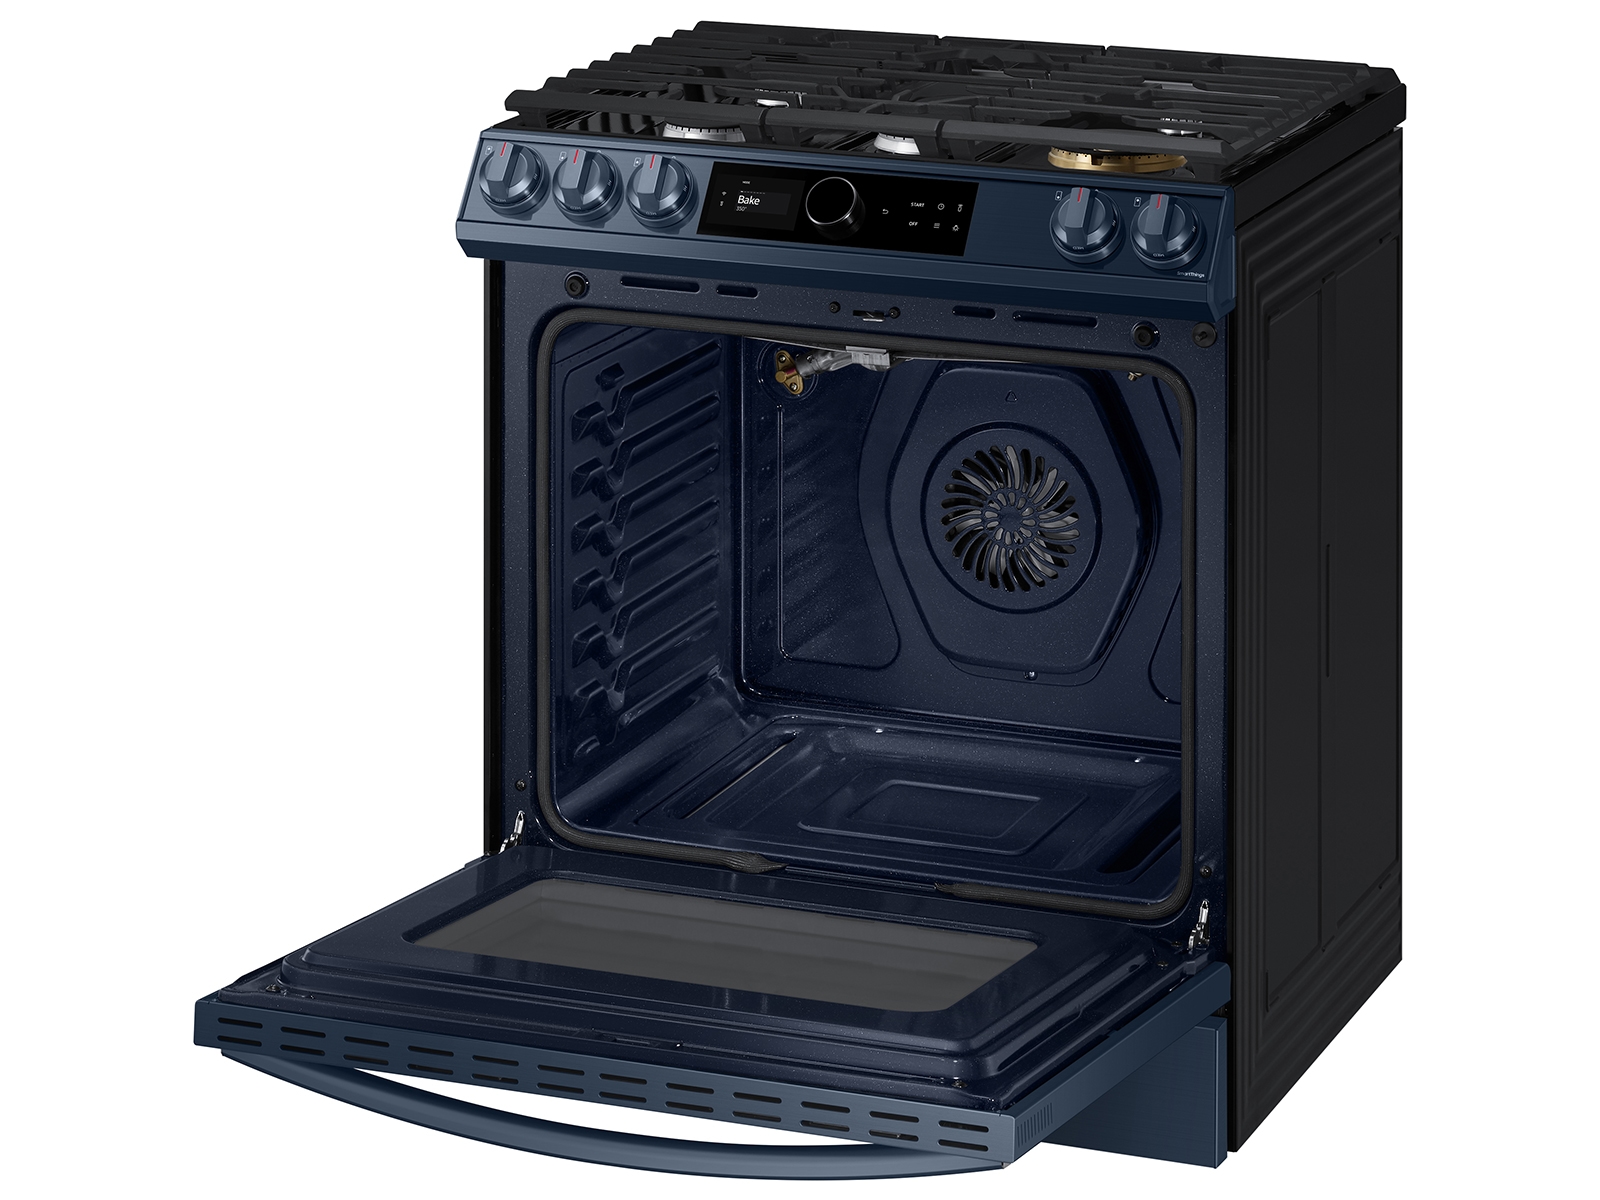 GE Appliances, Drop Heat up the Smart Kitchen with New Partnership